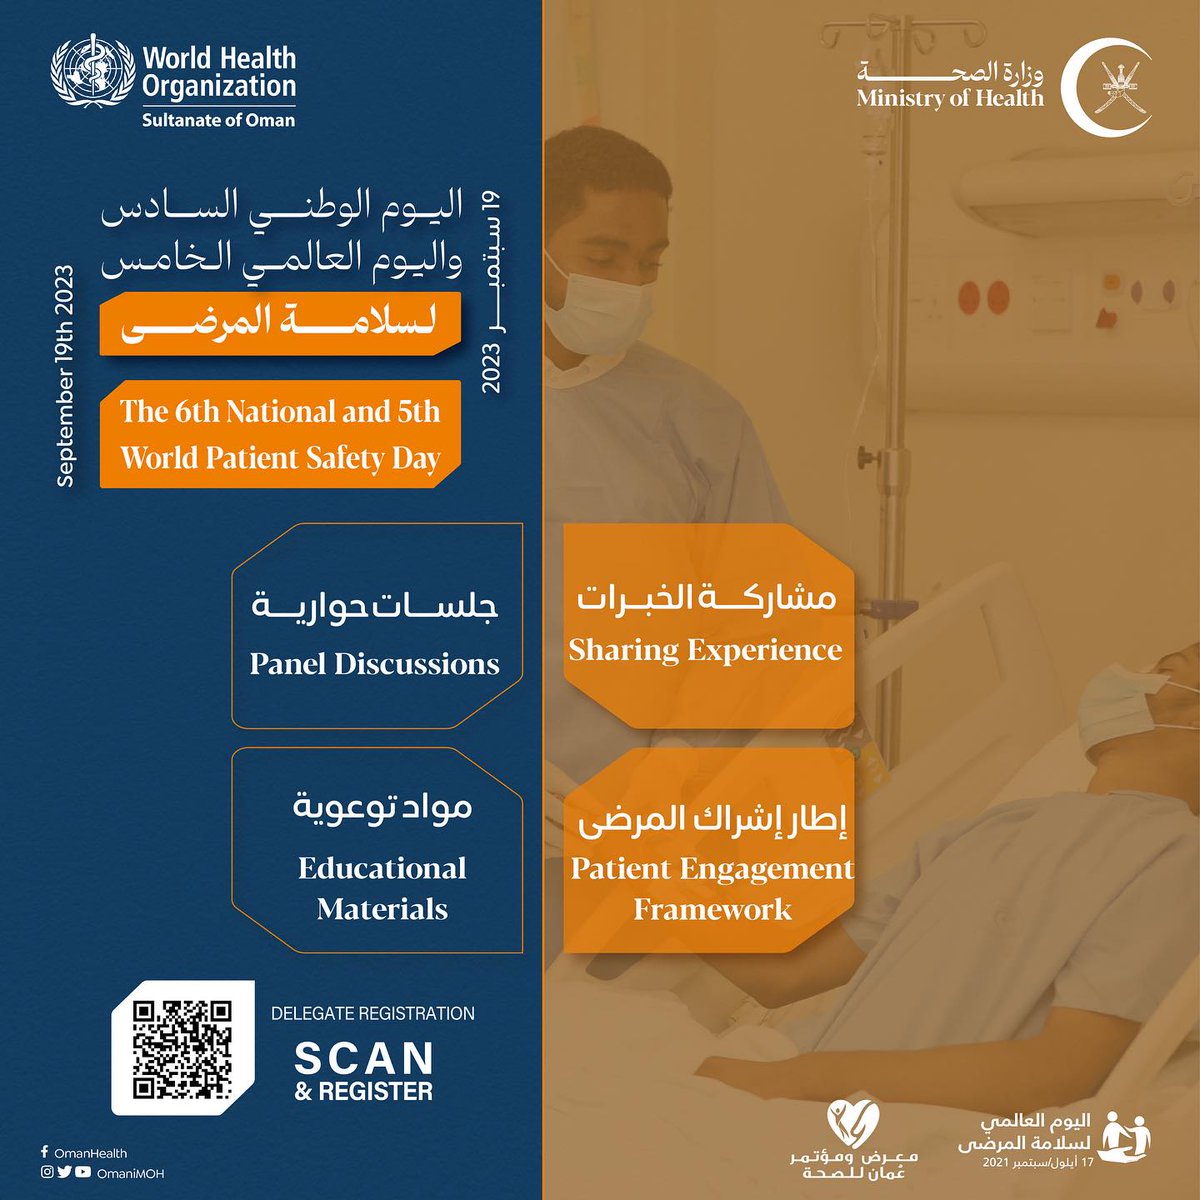 Register to attend Oman Healthcare Conference and celebrate the 6th National and 5th World Patient Safety Day on the 19th of September at OHEC 2023. You can register today using the link:

lnkd.in/d2M9uJqE

#OHEC #Oman #healthcare #patientsafety #patientsafetyday